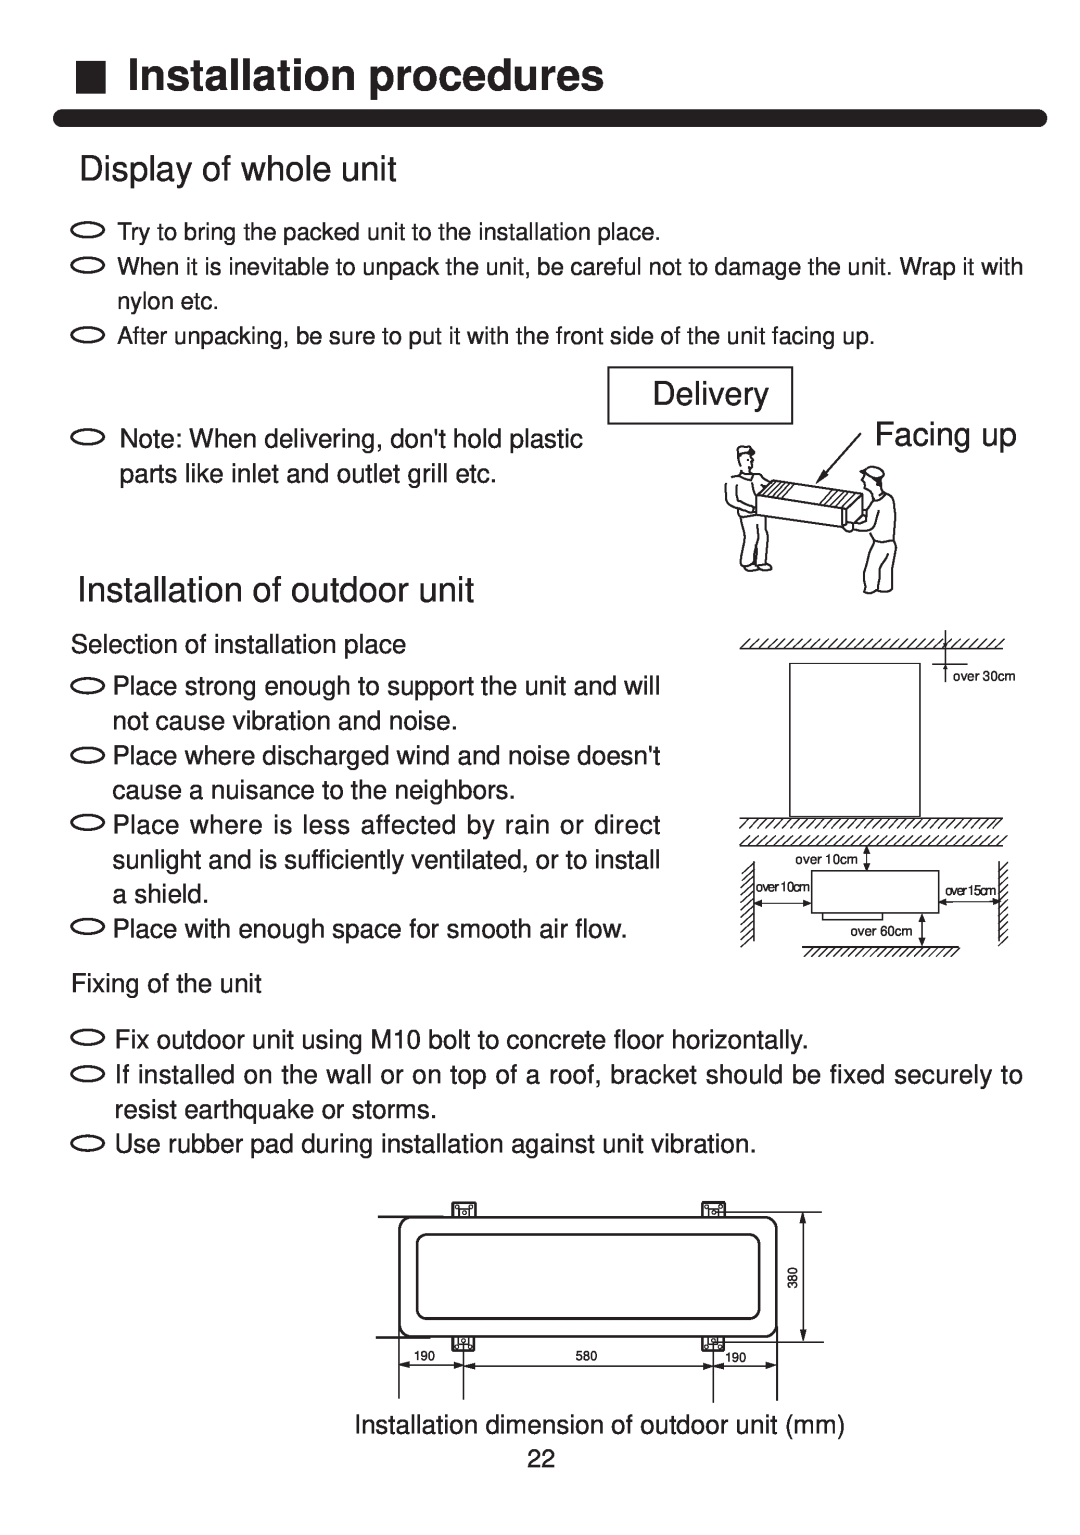 Haier AP602AKEAA Installation procedures, Display of whole unit, Installation of outdoor unit, Delivery, Facing up 